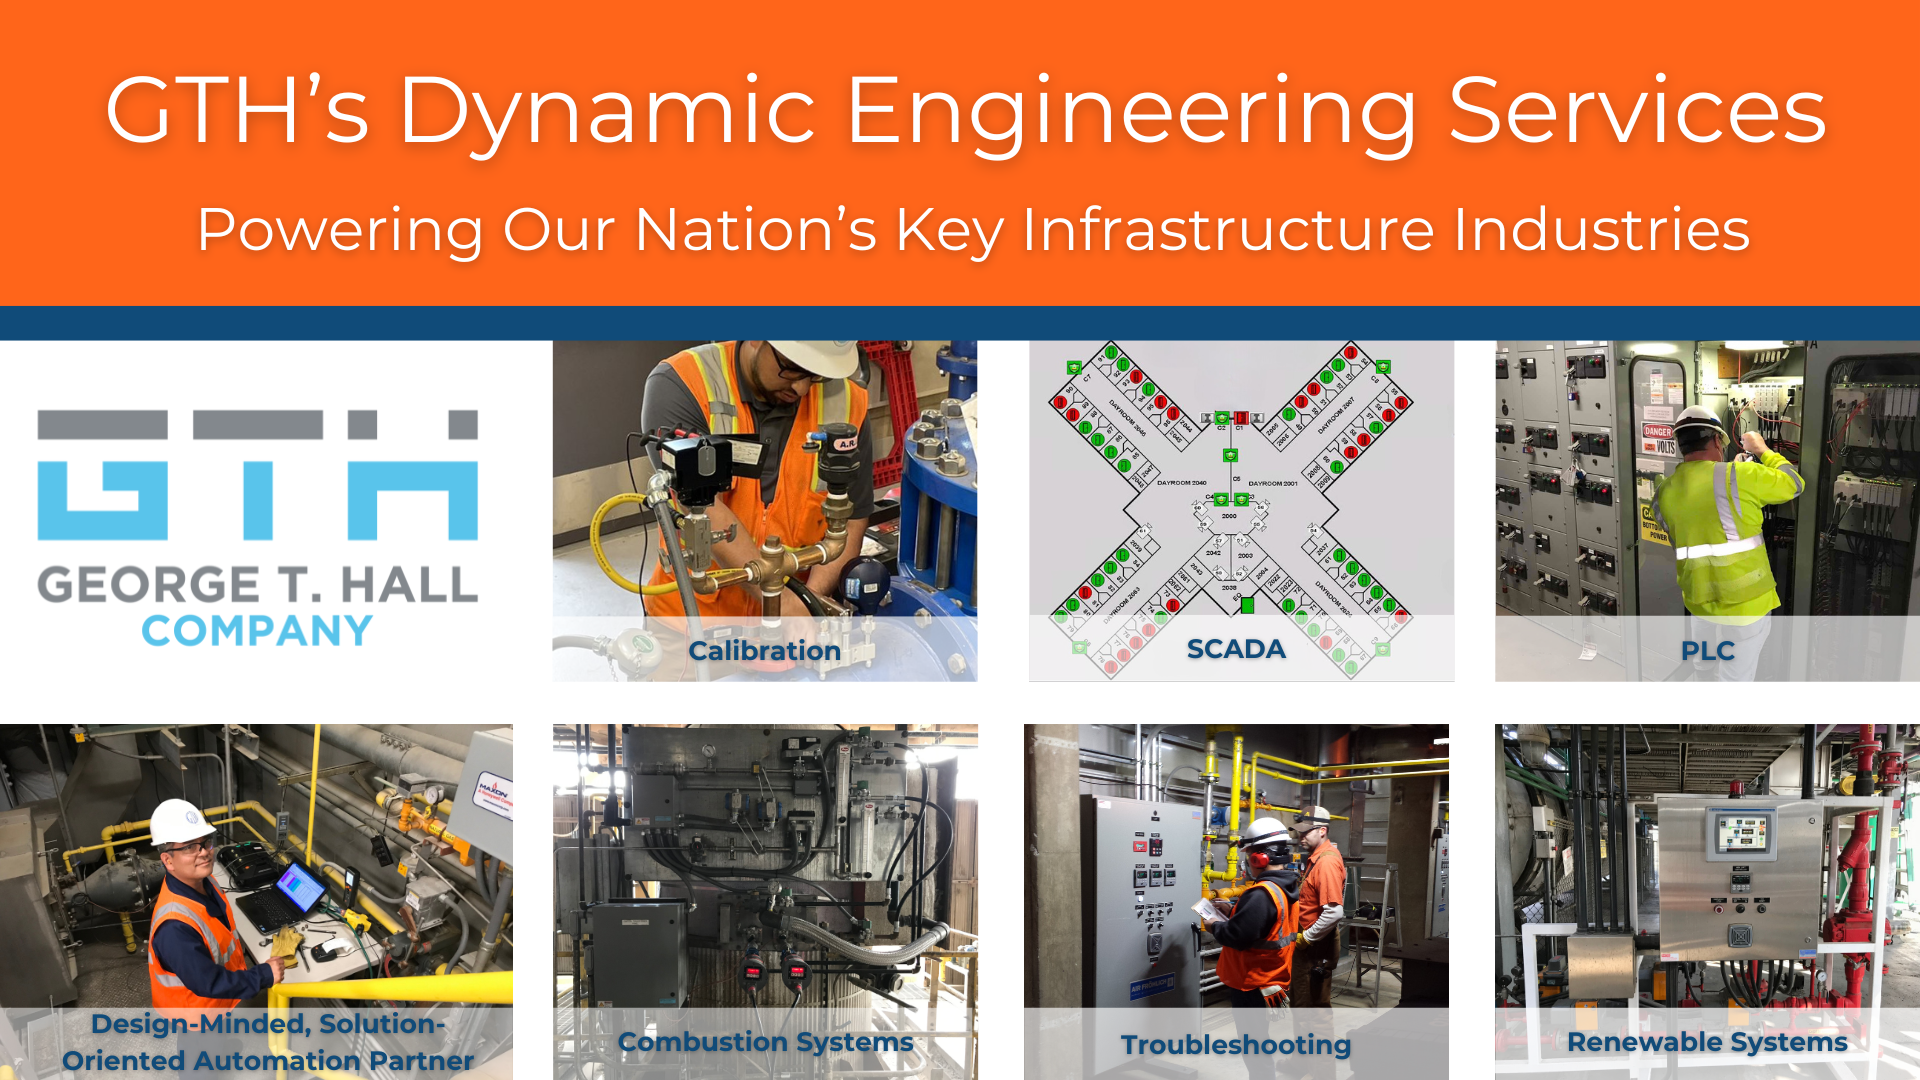 GTH's Dynamic Engineering Services: Powering Our Nation's Key Infrastructure Industries